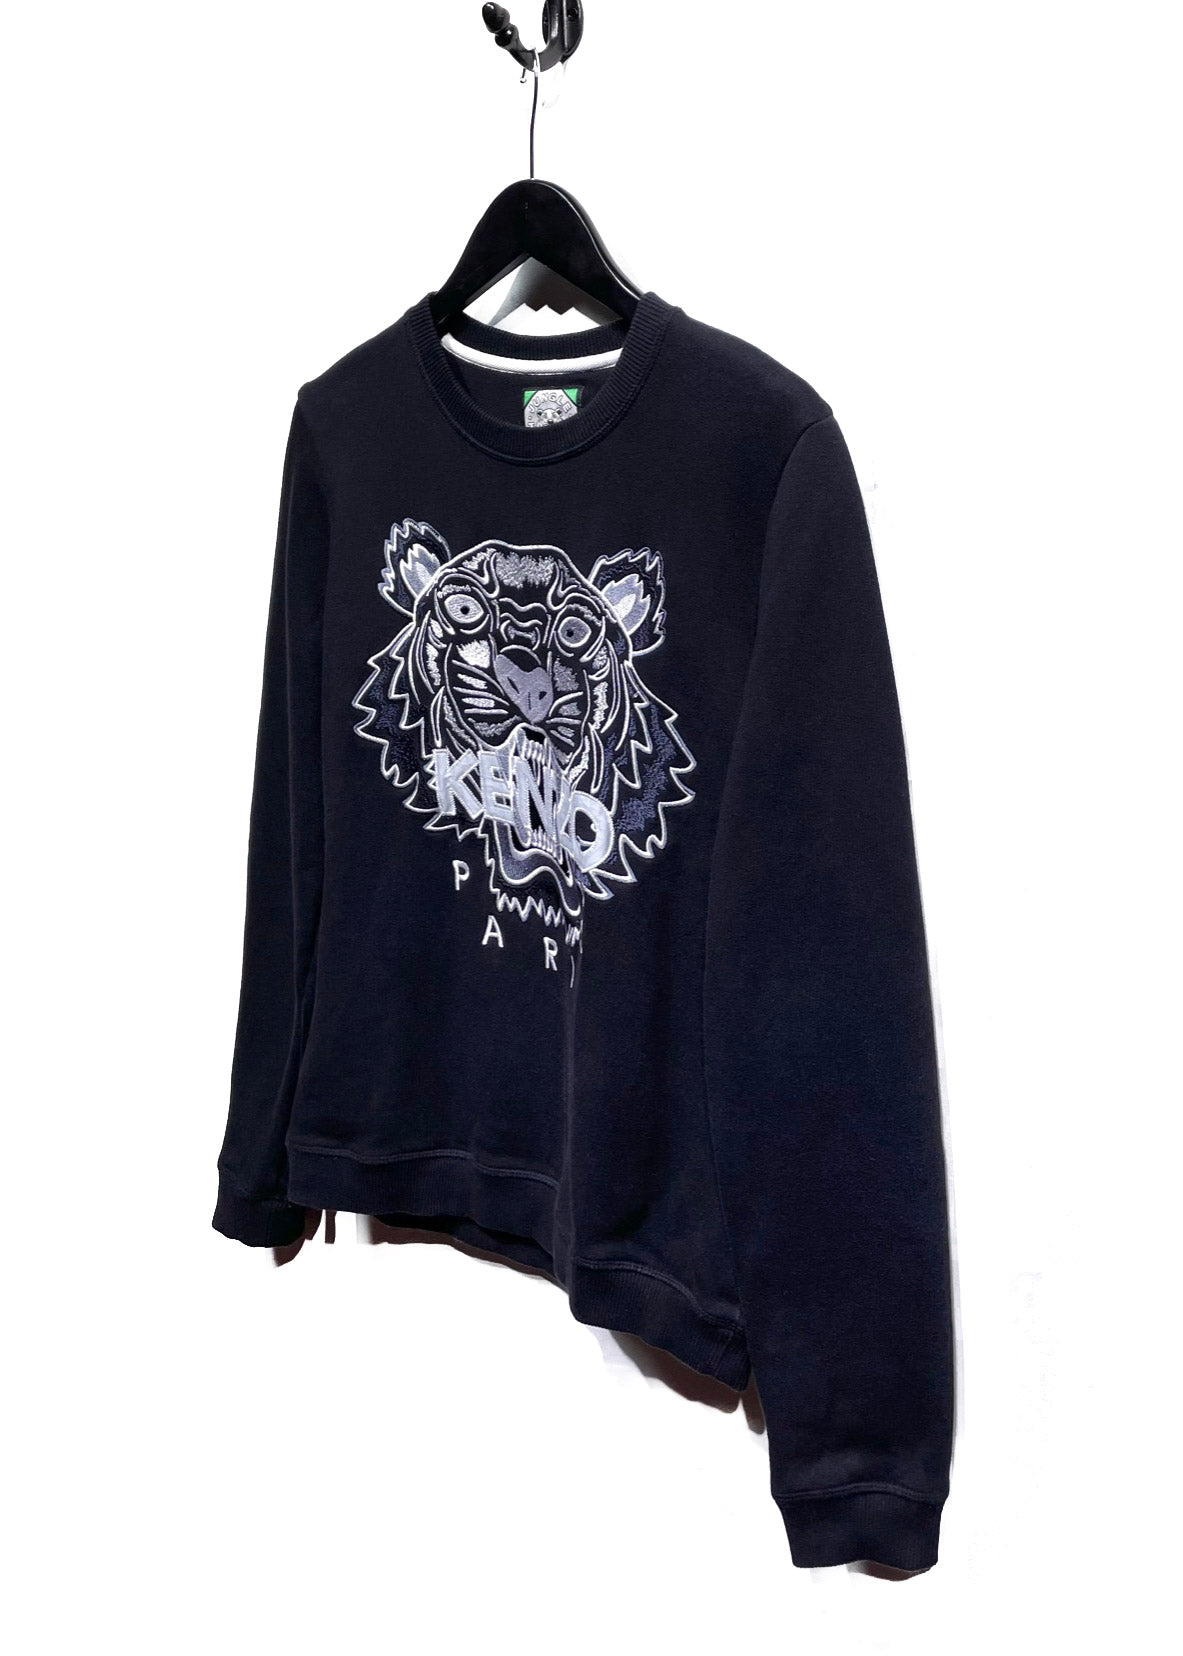 Kenzo Black Tiger Embroidered Sweatshirt – Boutique LUC.S